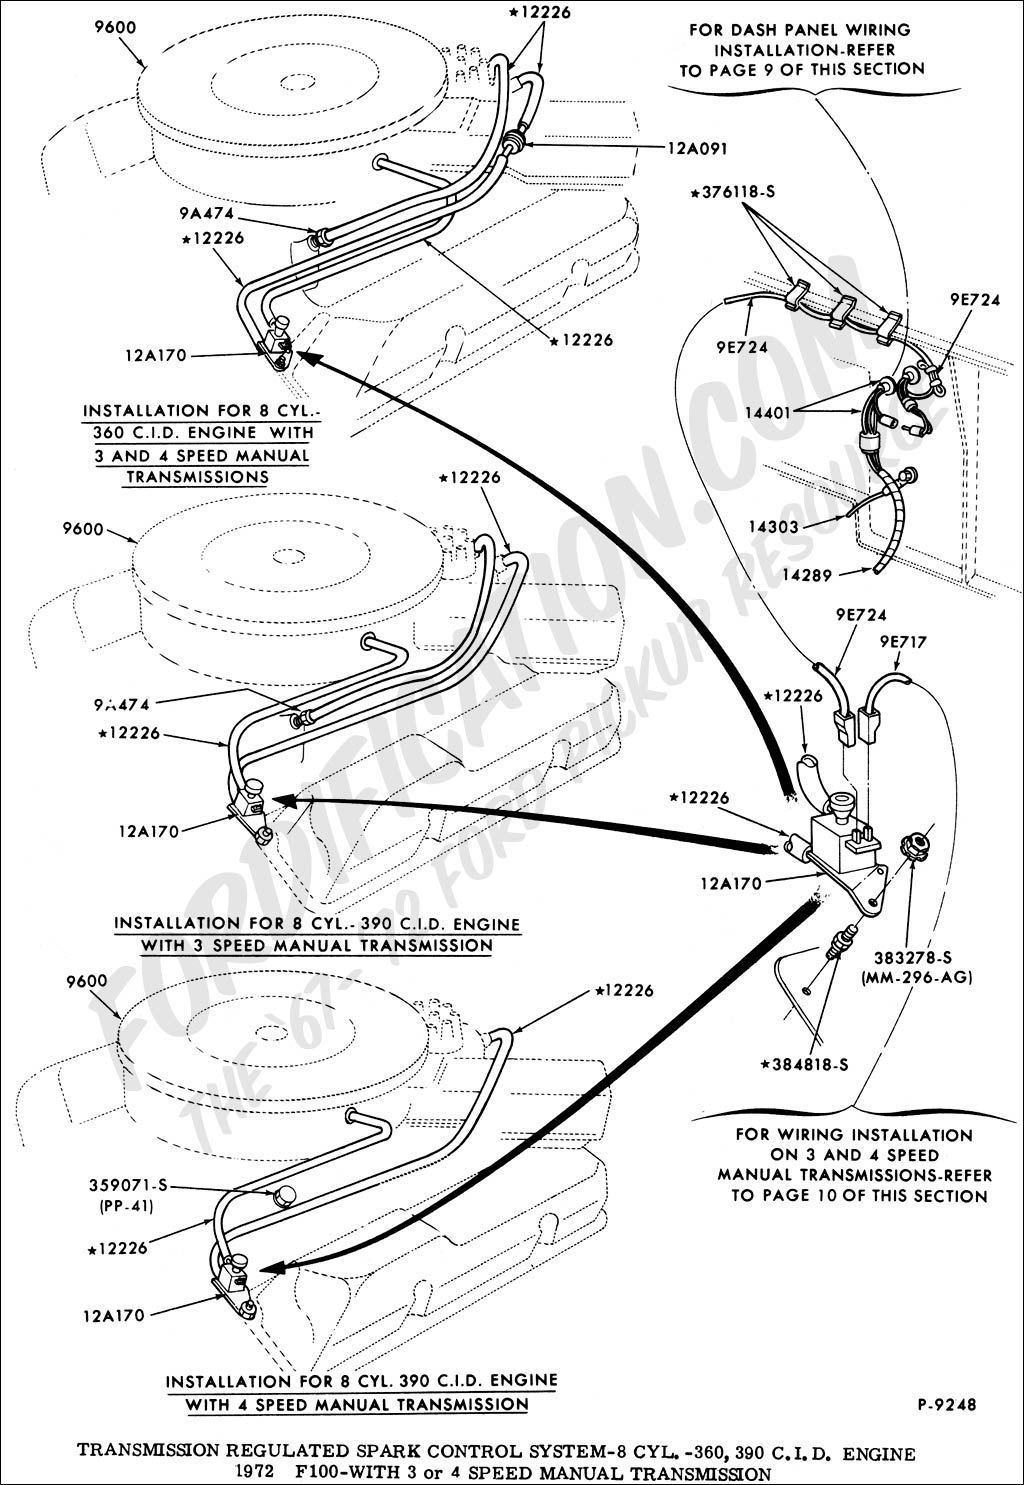 smart turn signal wiring diagram for a honda valkyrie